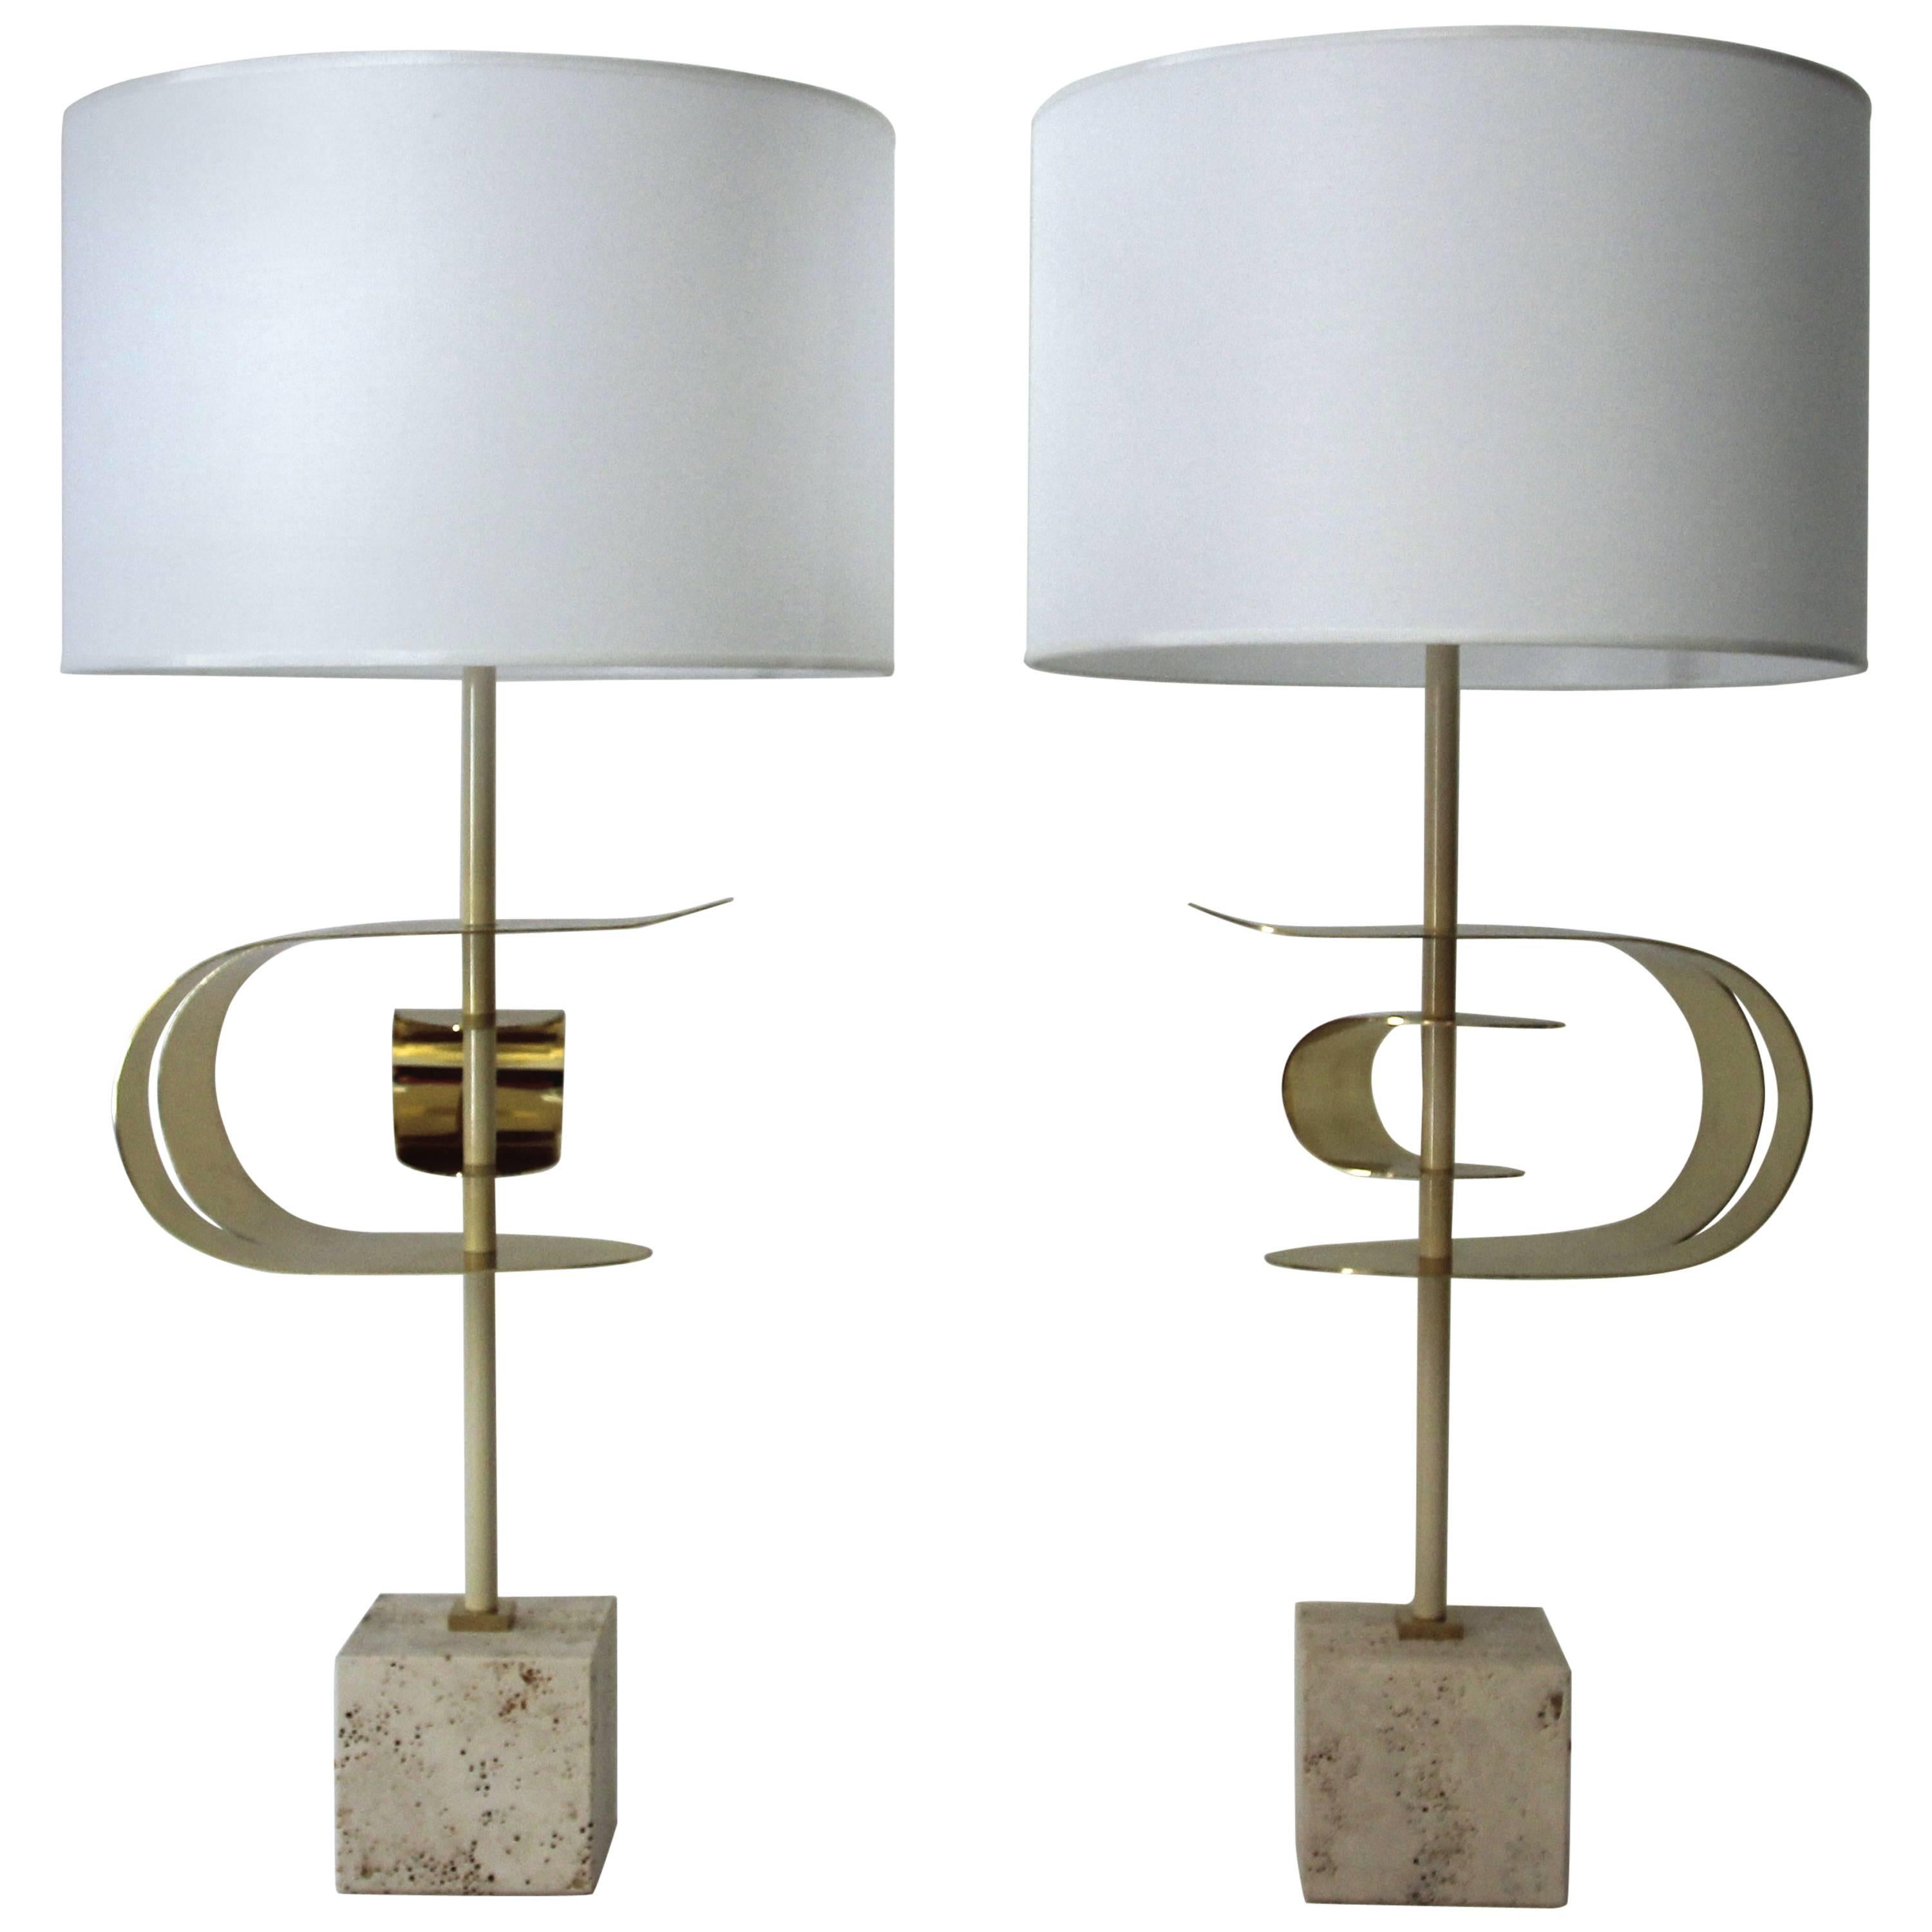 Angelo Brotto, Pair of Lamps, Brass and Travertine Base, circa 2000, Italy